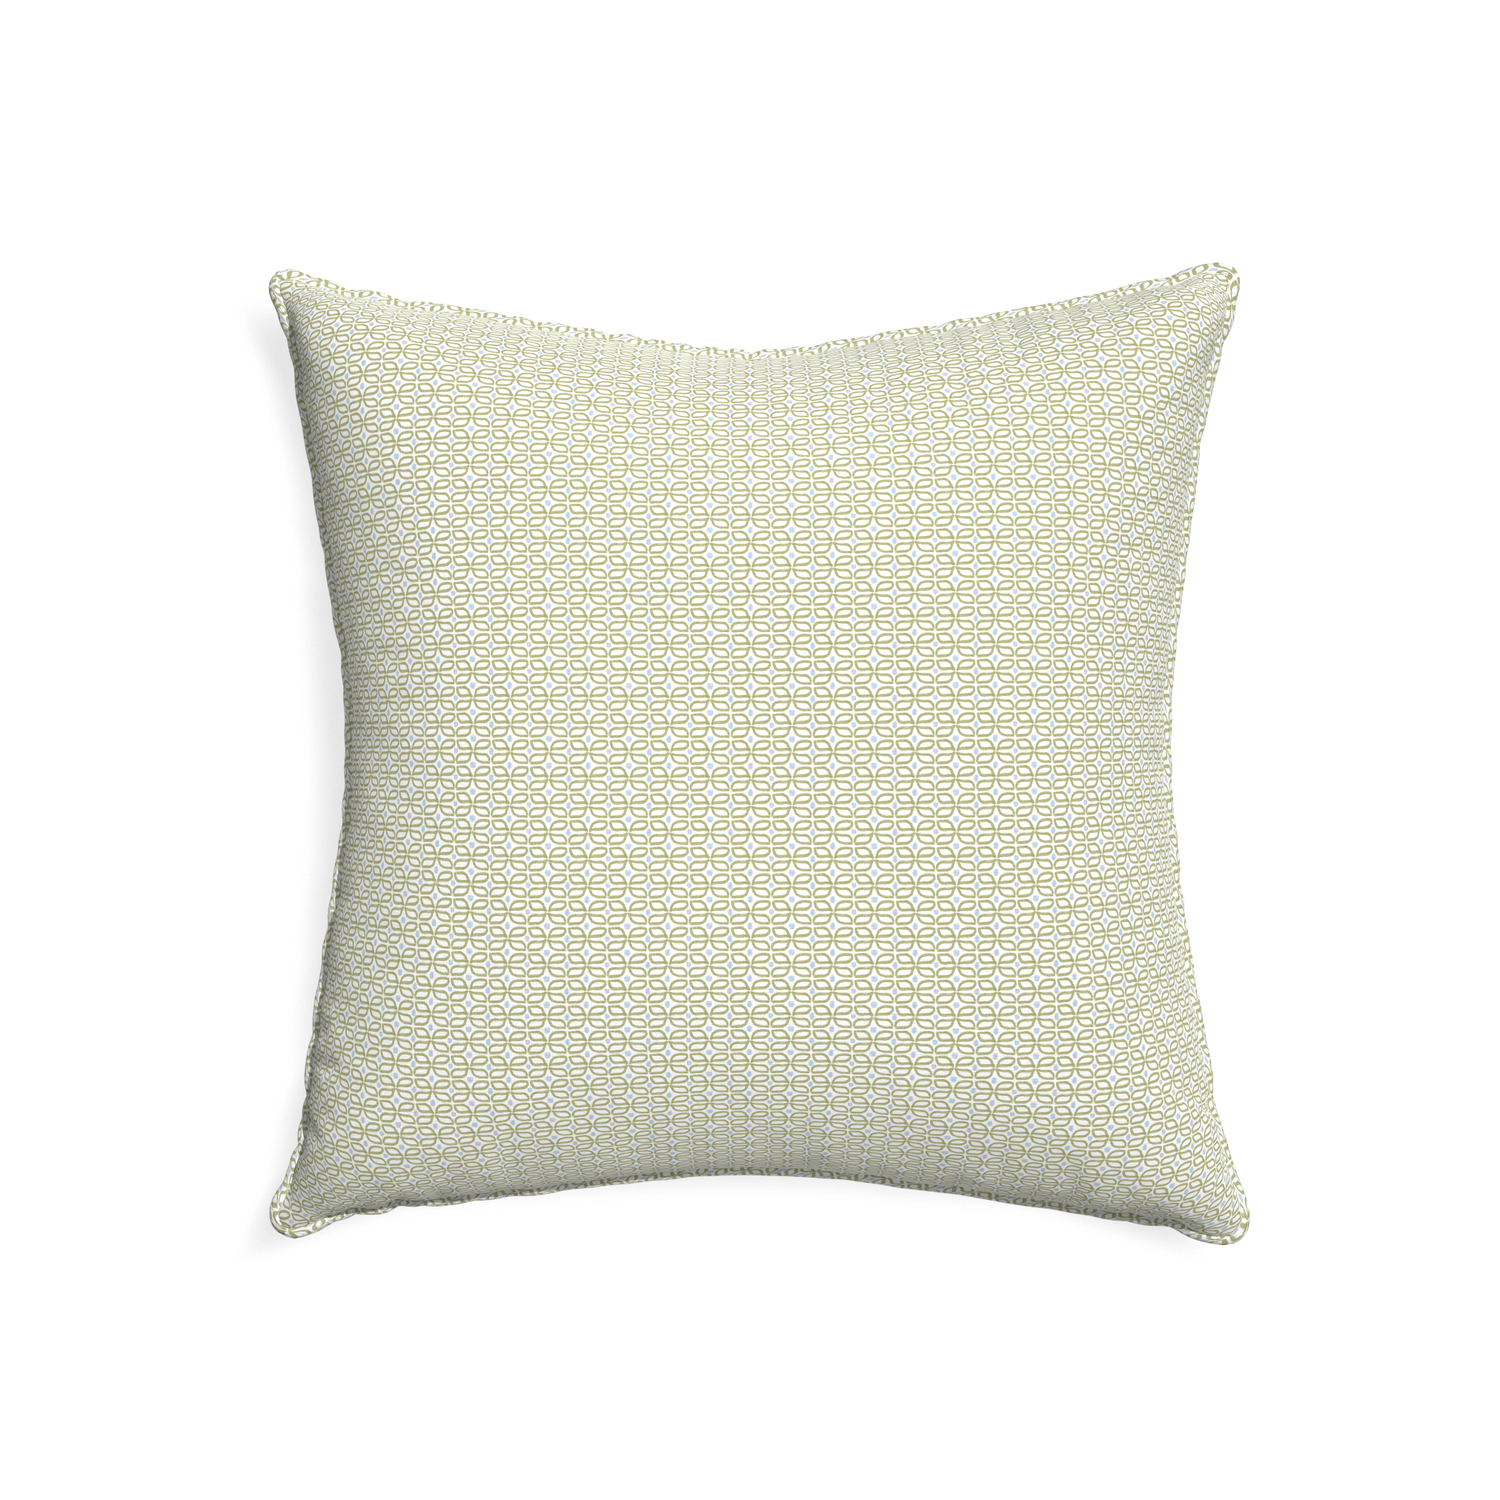 22-square loomi moss custom pillow with l piping on white background